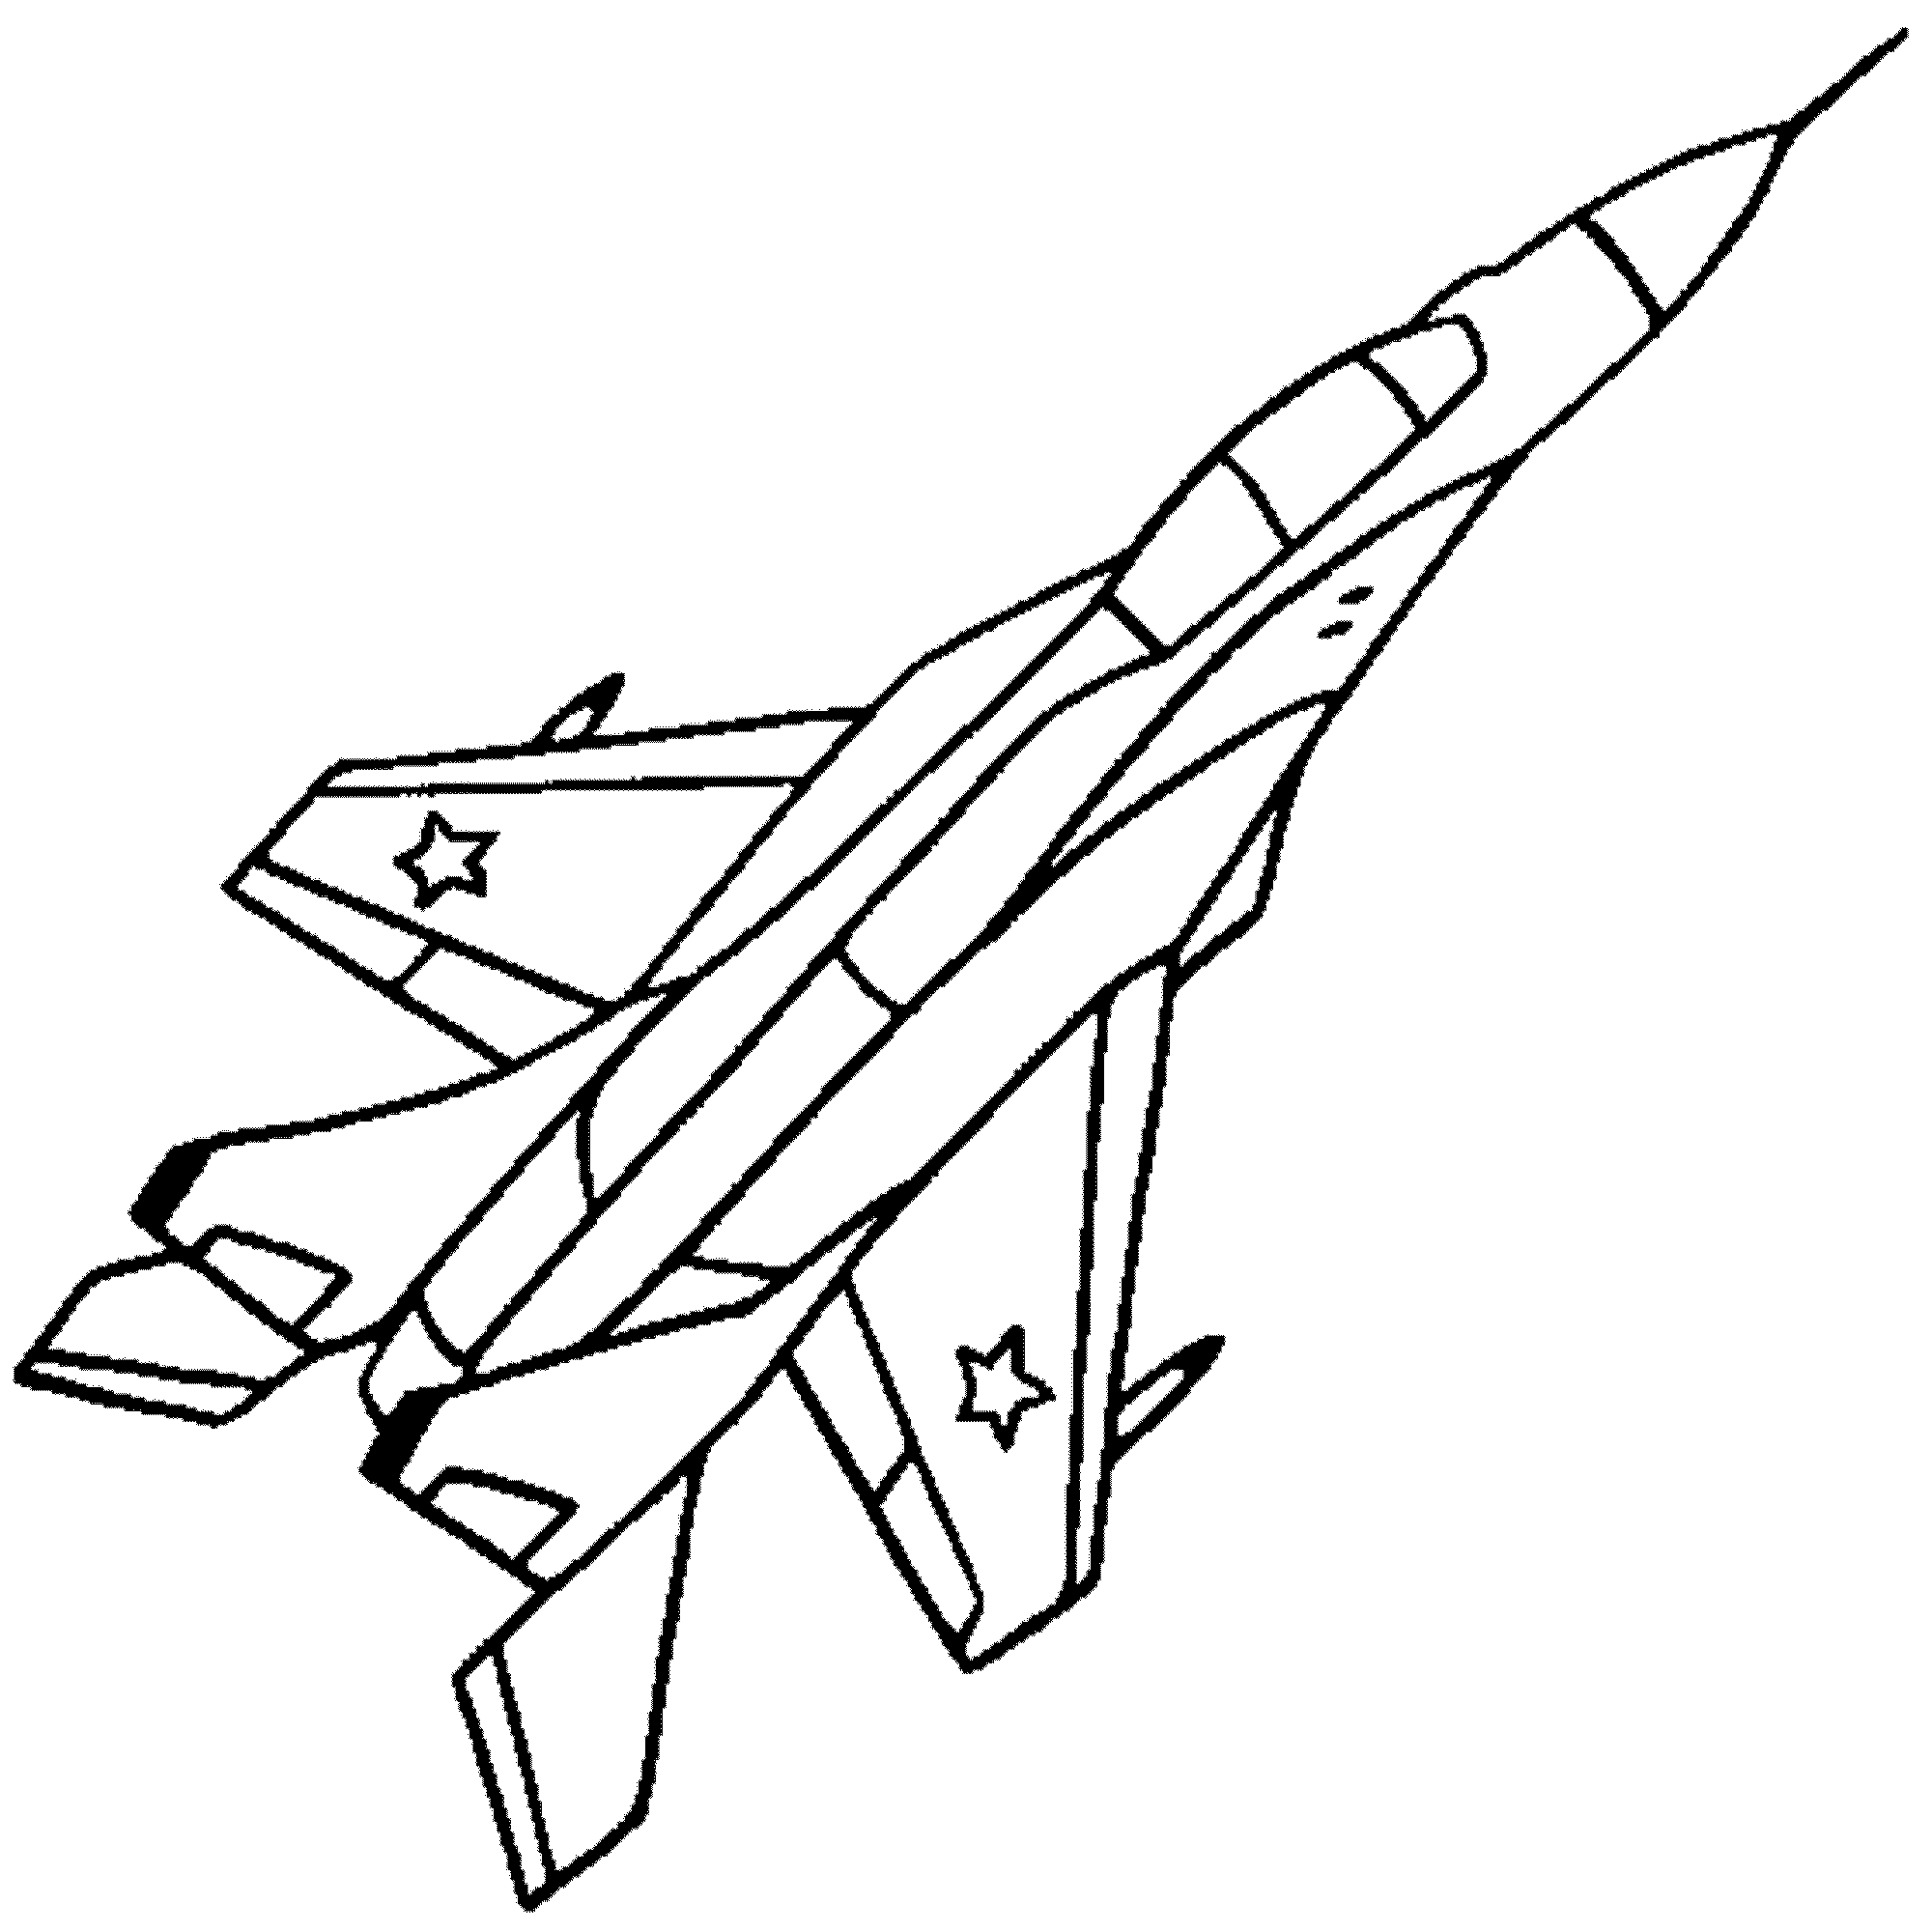 ww1 coloring printable page for airplanes